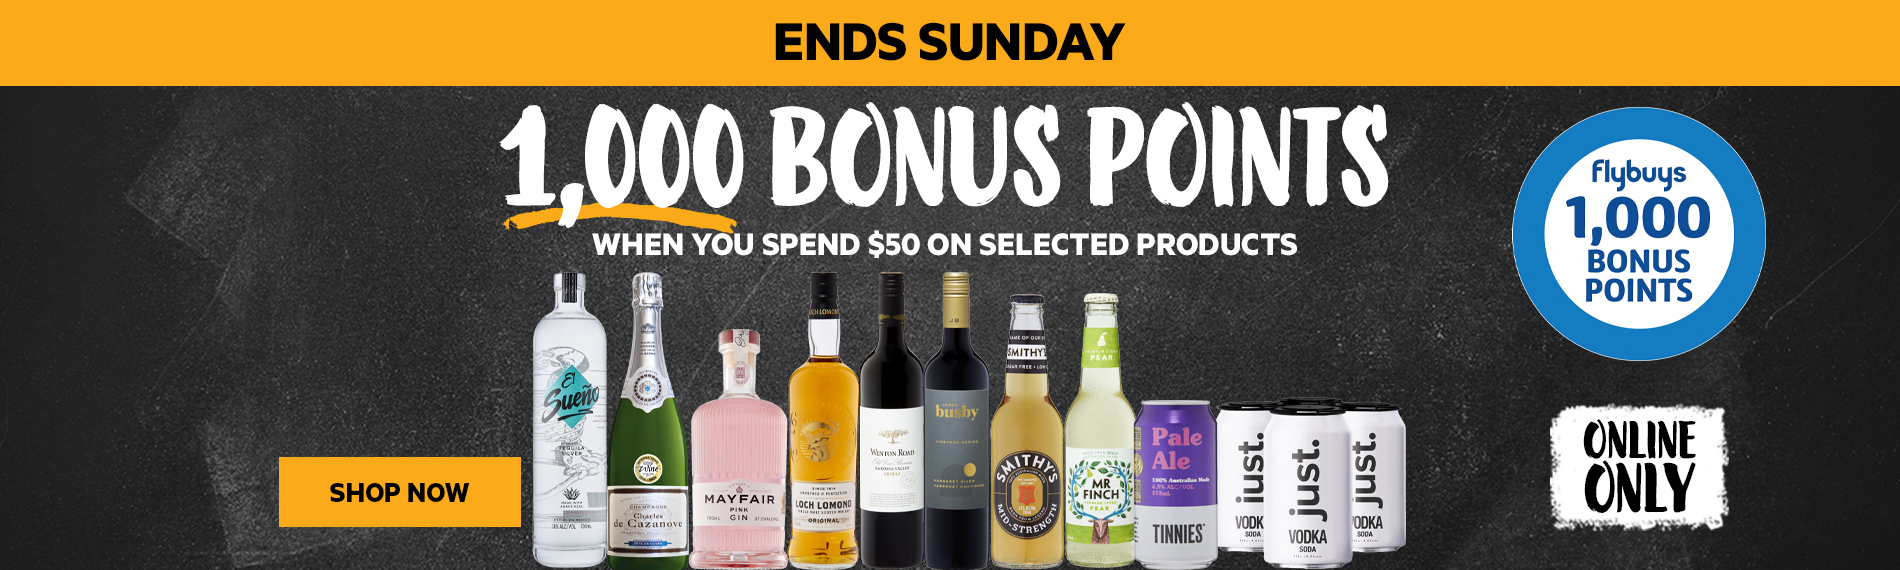 Collect 1,000 Flybuys bonus points with $50+ spend including including Gin, Irish Whiskey & more